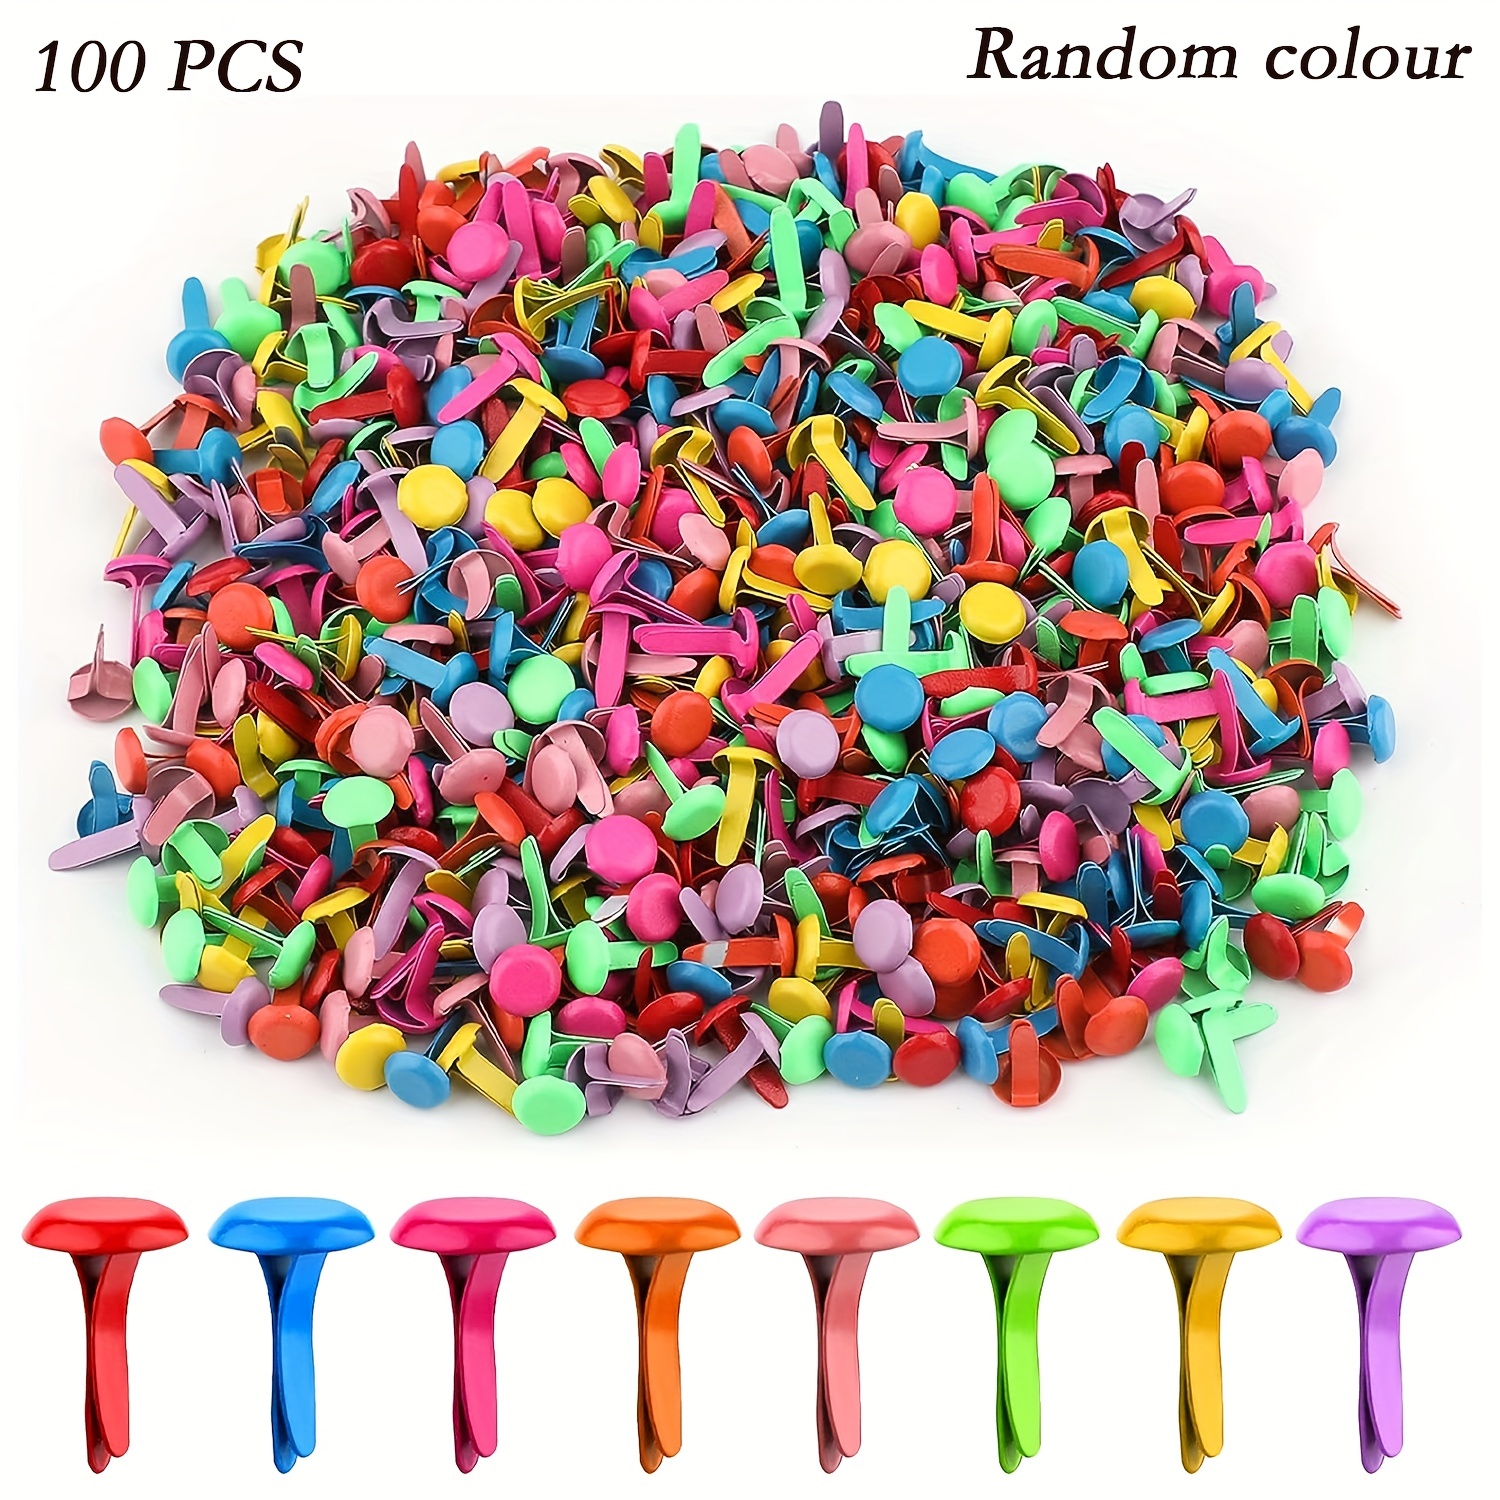 250PCS Mini Brads for Paper Crafts Brads Split Pins Round Head Paper  Fasteners Metal Brads for Scrapbooking DIY Projects (Multicolor)